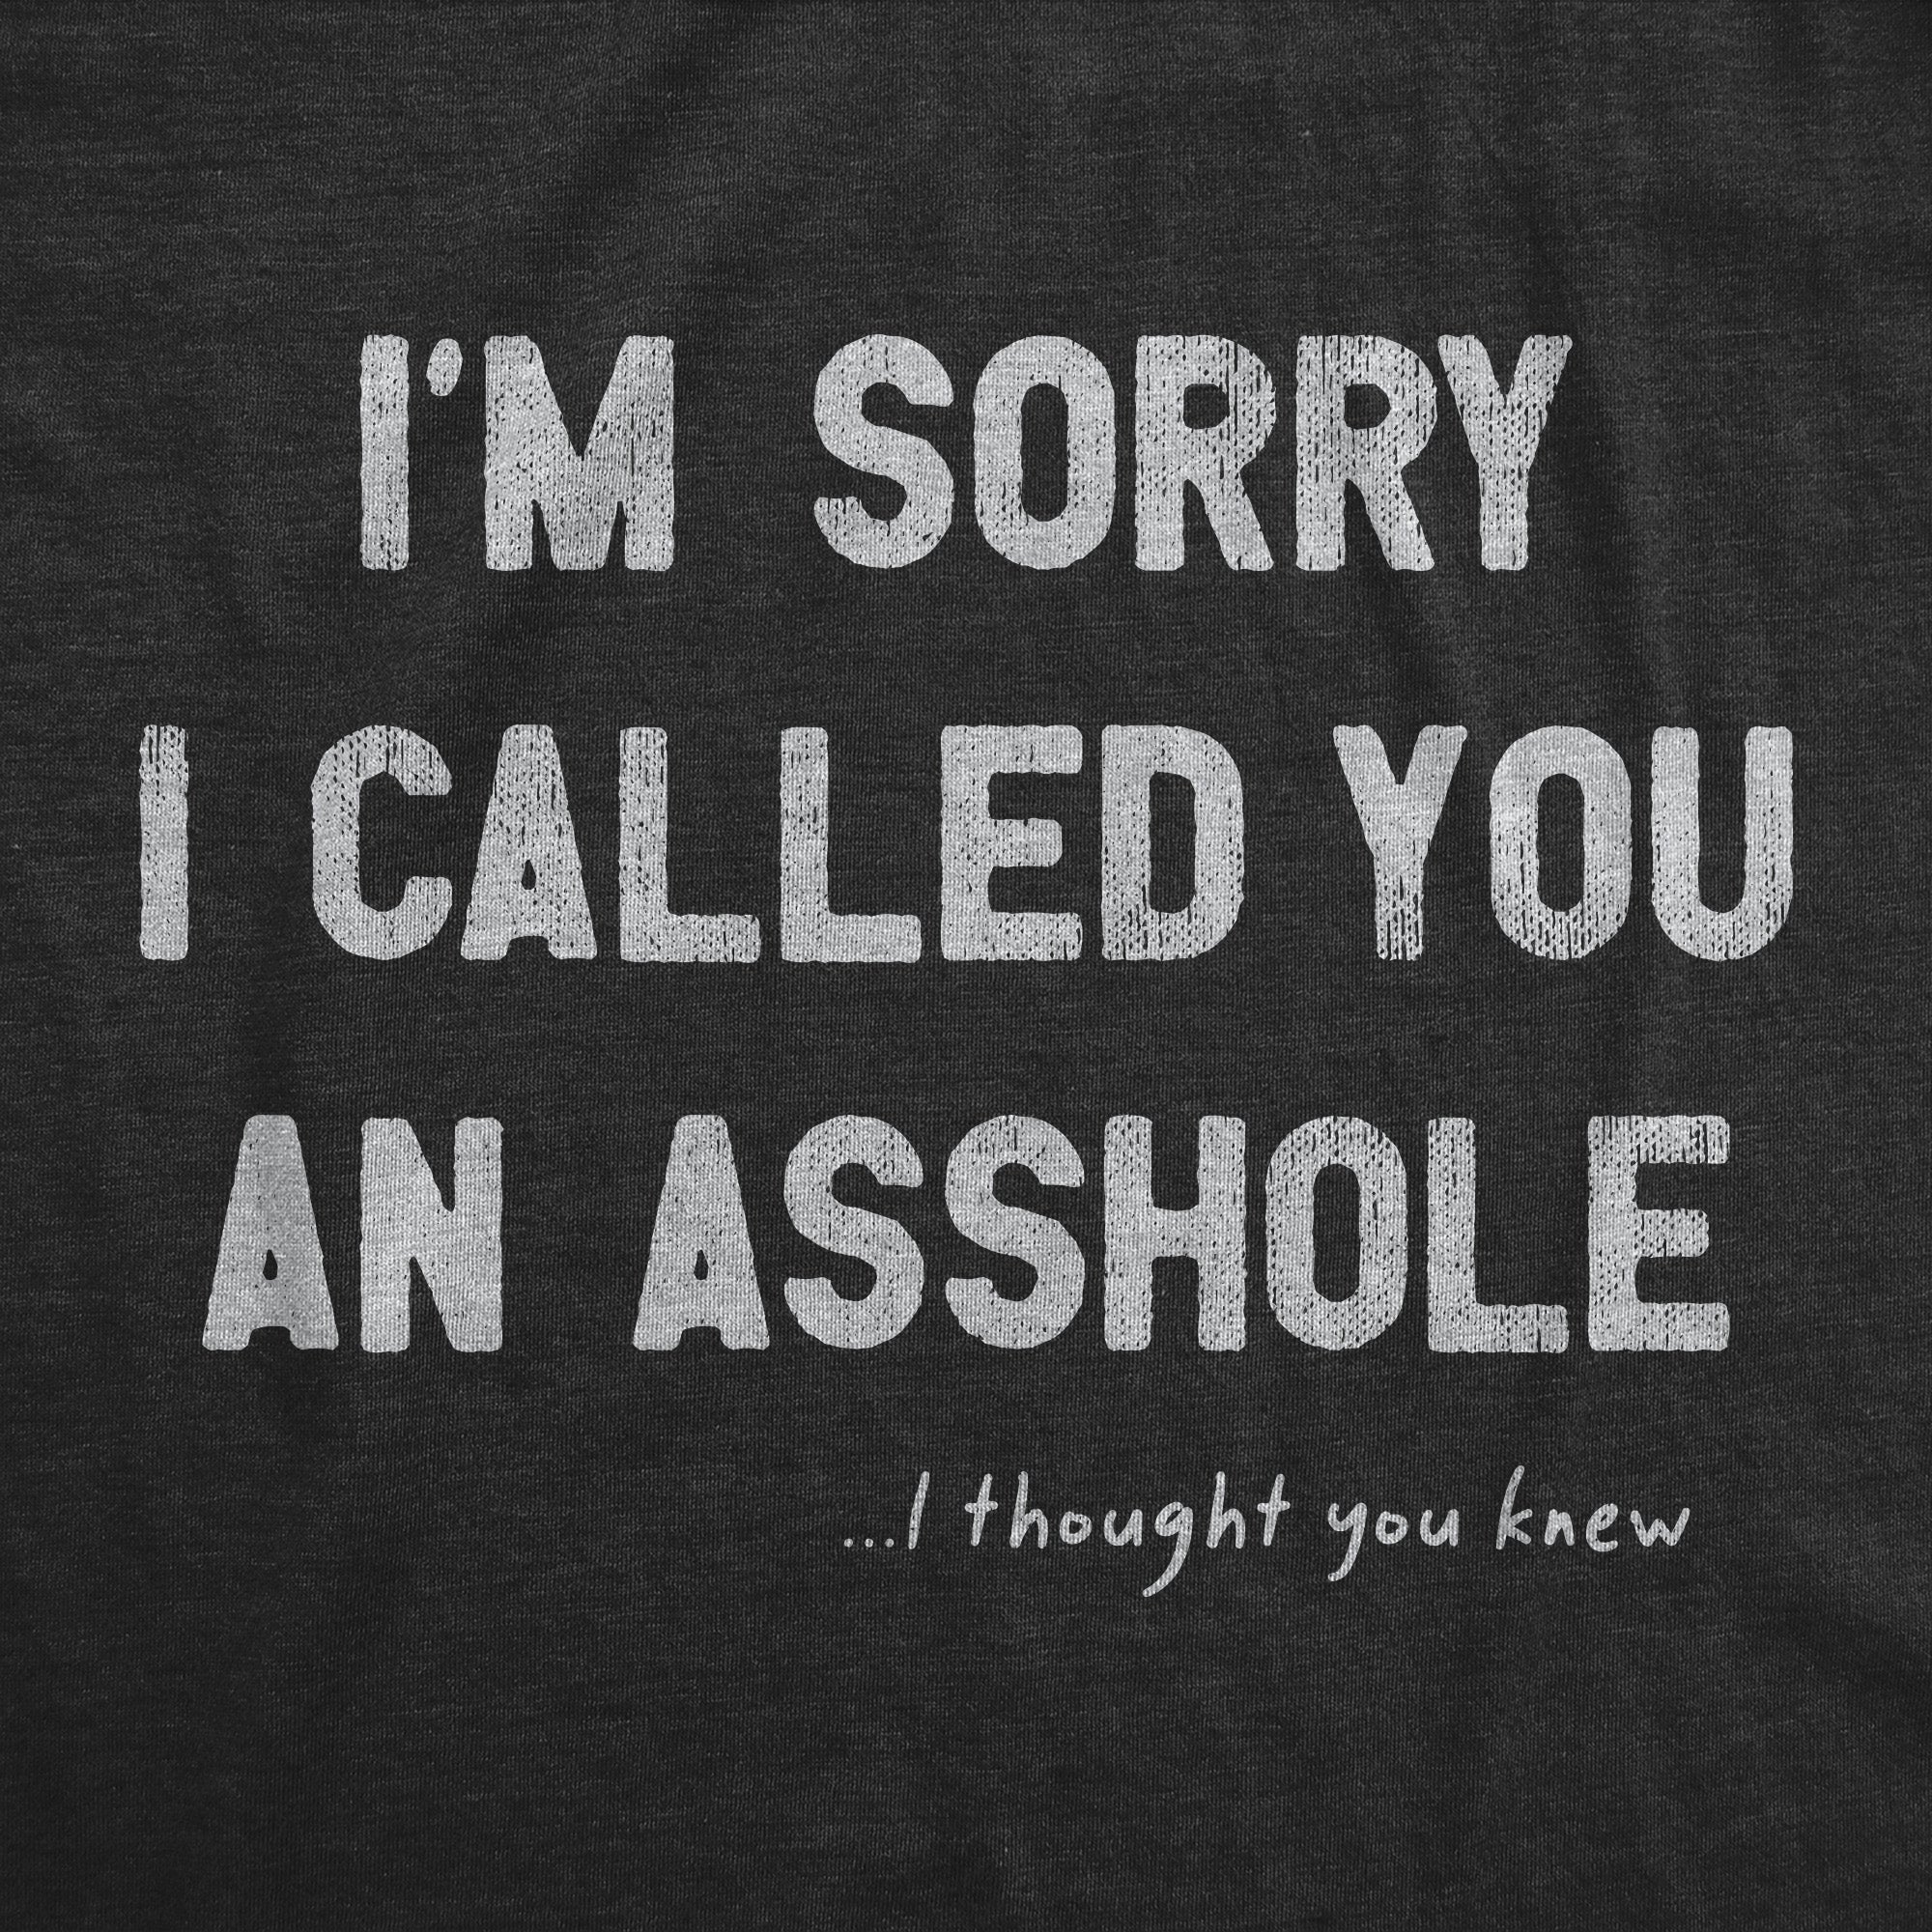 Funny Heather Black - ASSHOLE Im Sorry I Called You An Asshole Mens T Shirt Nerdy Sarcastic Tee